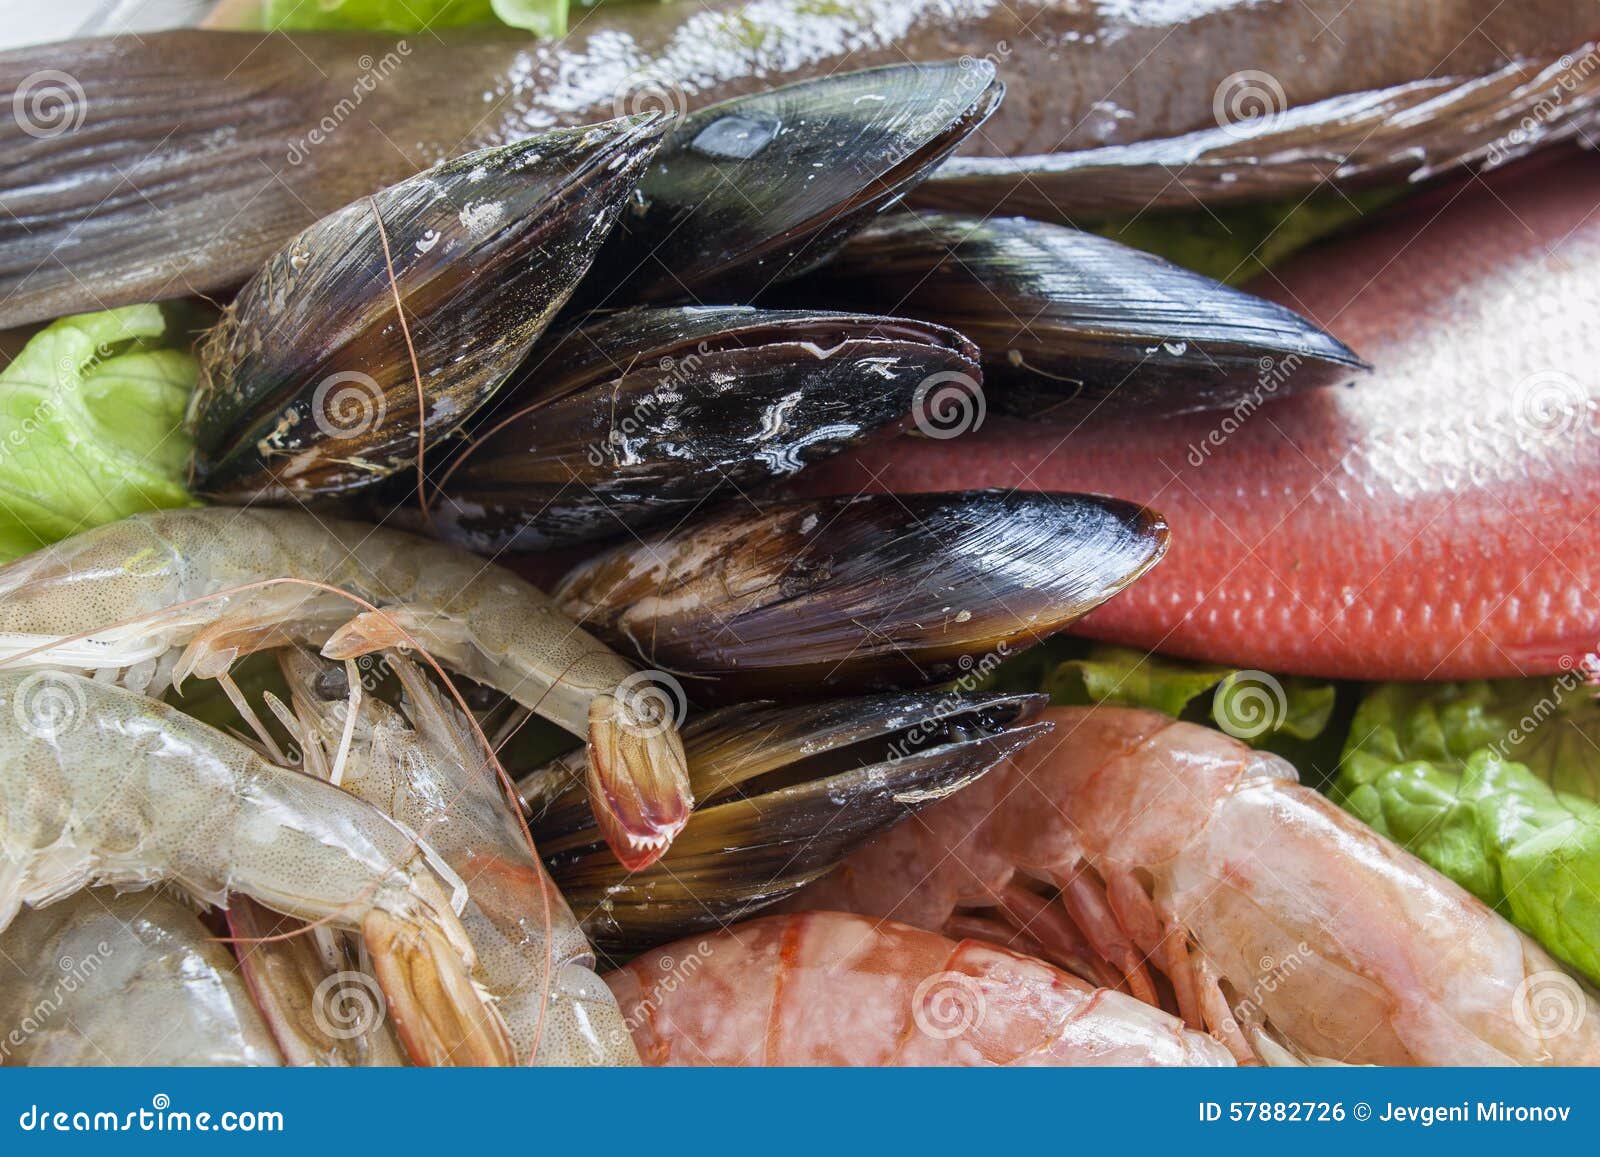 fresh shrimps, mussels and fish